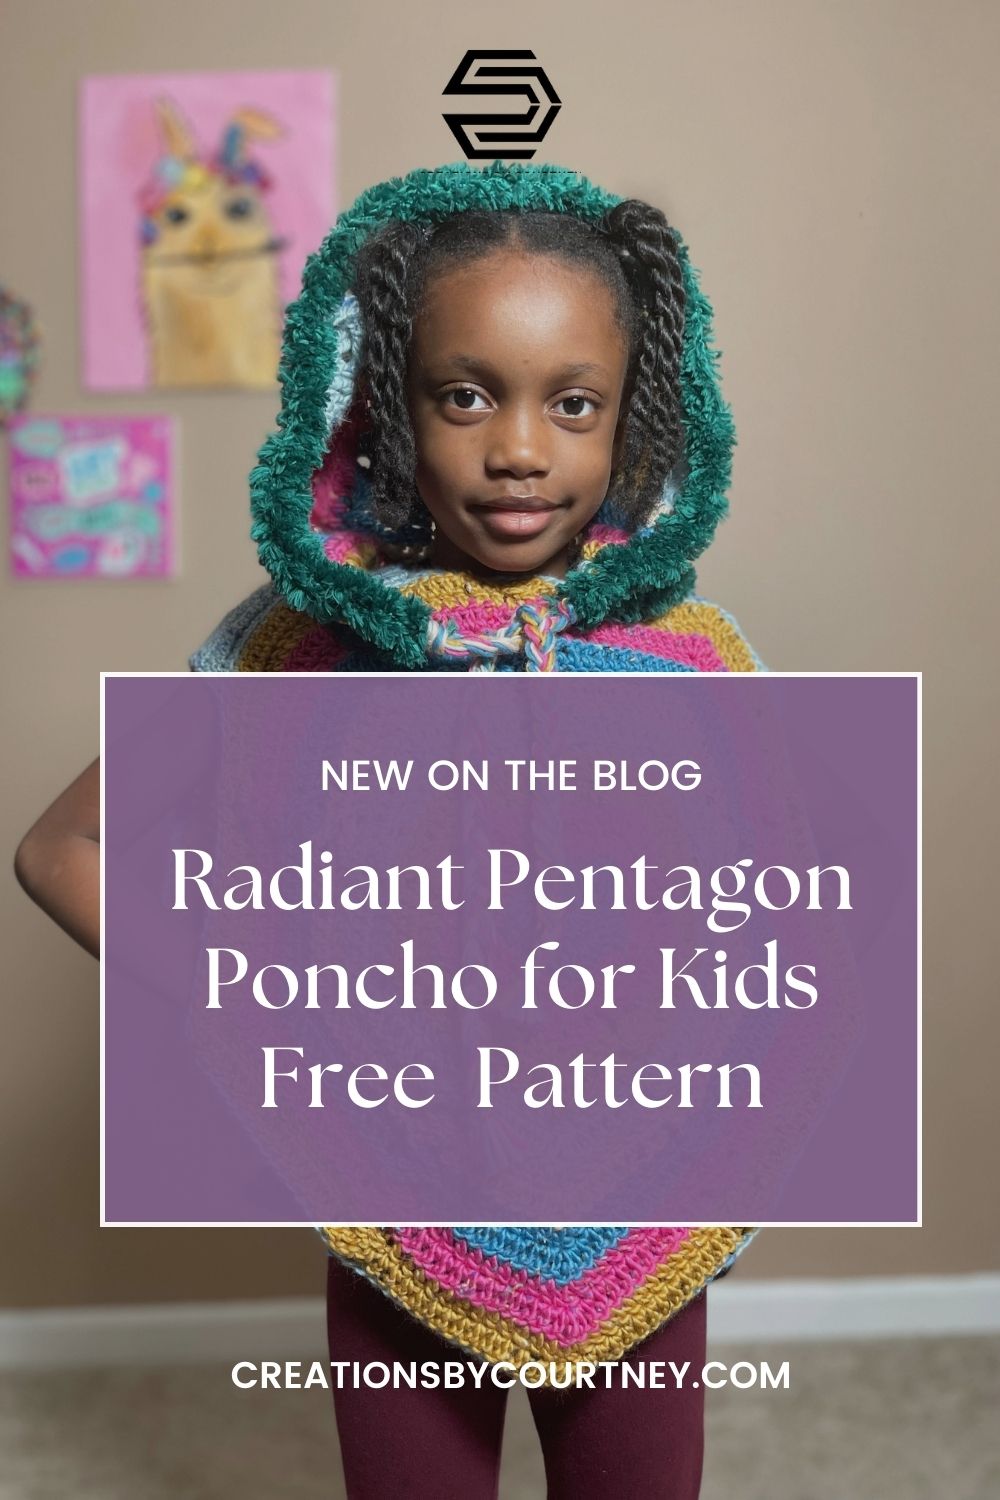 The Radiant Pentagon Poncho is a fun, colorful crochet poncho for children, sizes 2-16. Whether you choose 1 or 5 colors, this crochet poncho will keep your child warm and stylish. Don't forget to make the matching hood.